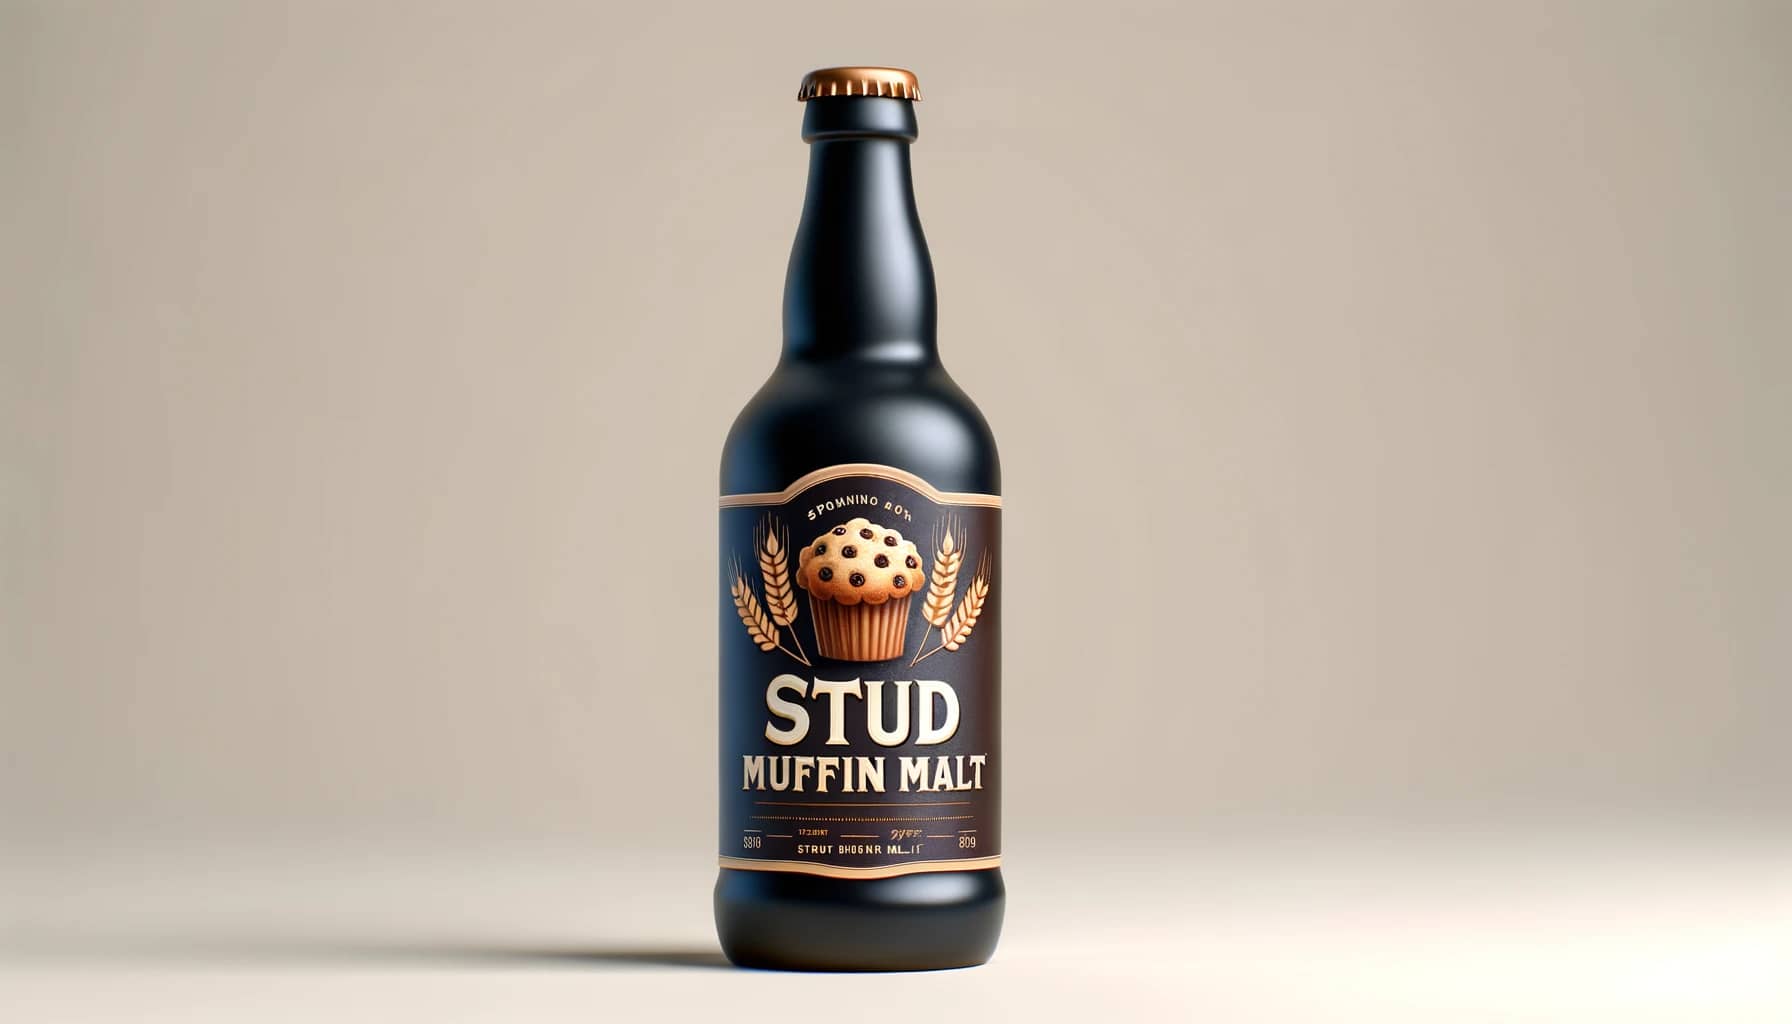 An example of a double entendre beer name, with the bottle and label showing.